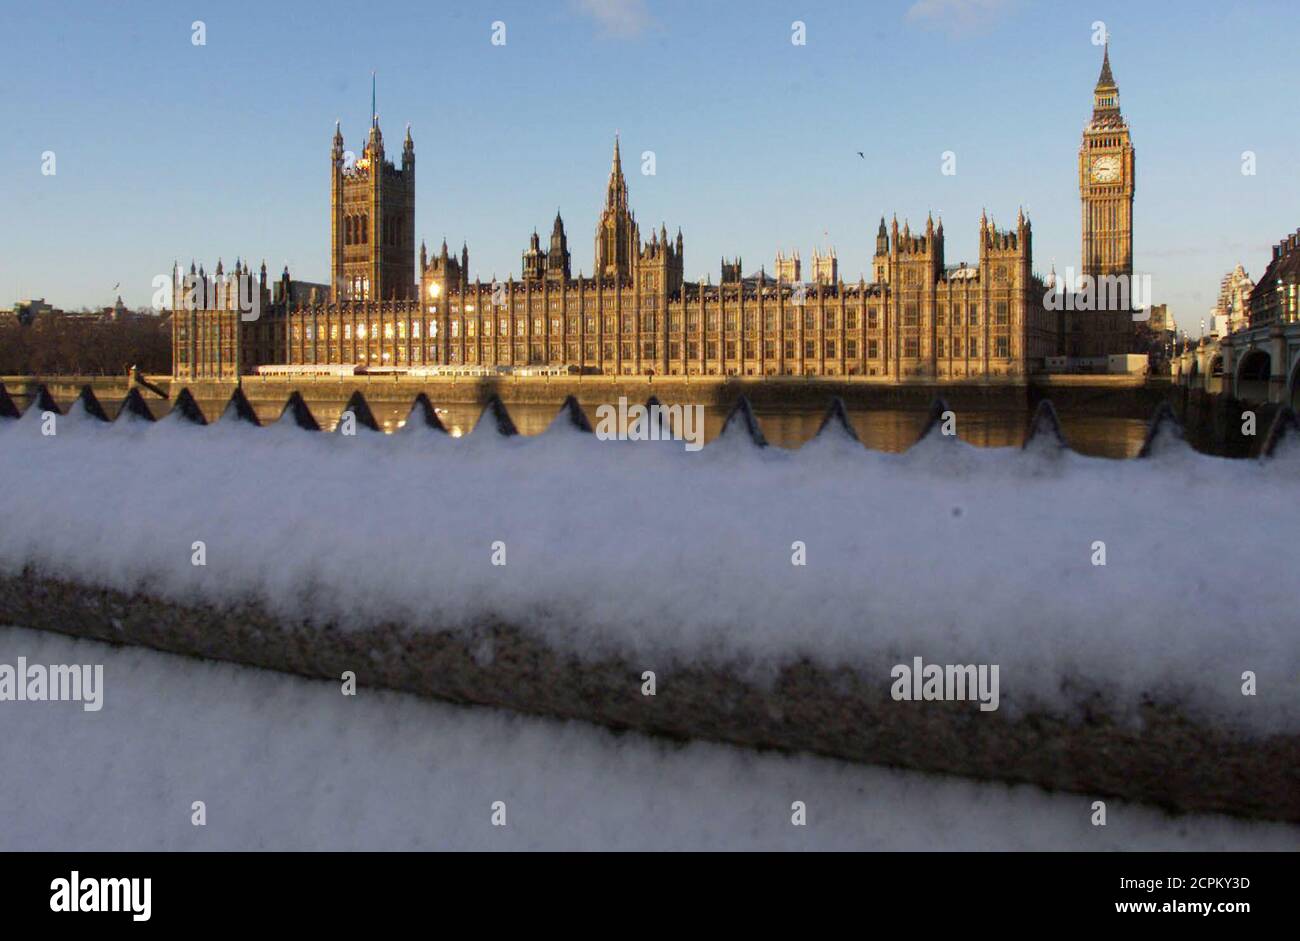 The Houses of Parliament, is bathed in early morning sunshine as overnight snow lays on the ground for the first time in four years in central London December 28, 2000. Britons have been told to stay at home and enjoy the rest of the holiday period, as the plunging temperatures and severe weather conditions lead to snow clogged roads and airport closures.  RUS/BR/AA Stock Photo